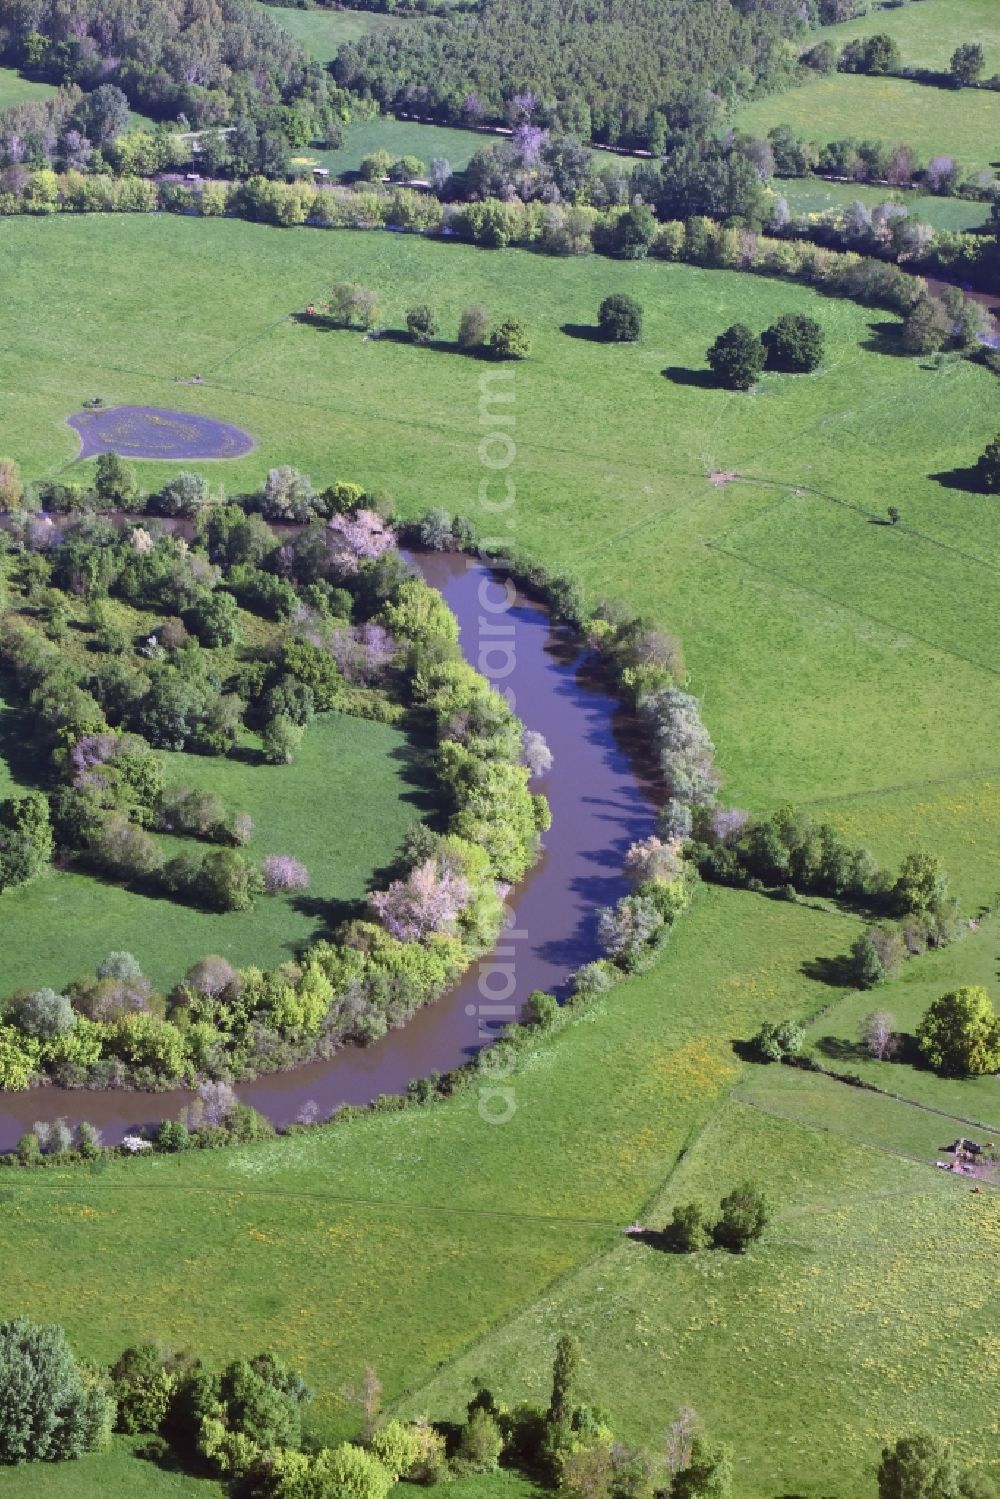 Saint-Denis-de-Pile from the bird's eye view: Curved loop of the riparian zones on the course of the river Isle in Saint-Denis-de-Pile in Aquitaine Limousin Poitou-Charentes, France